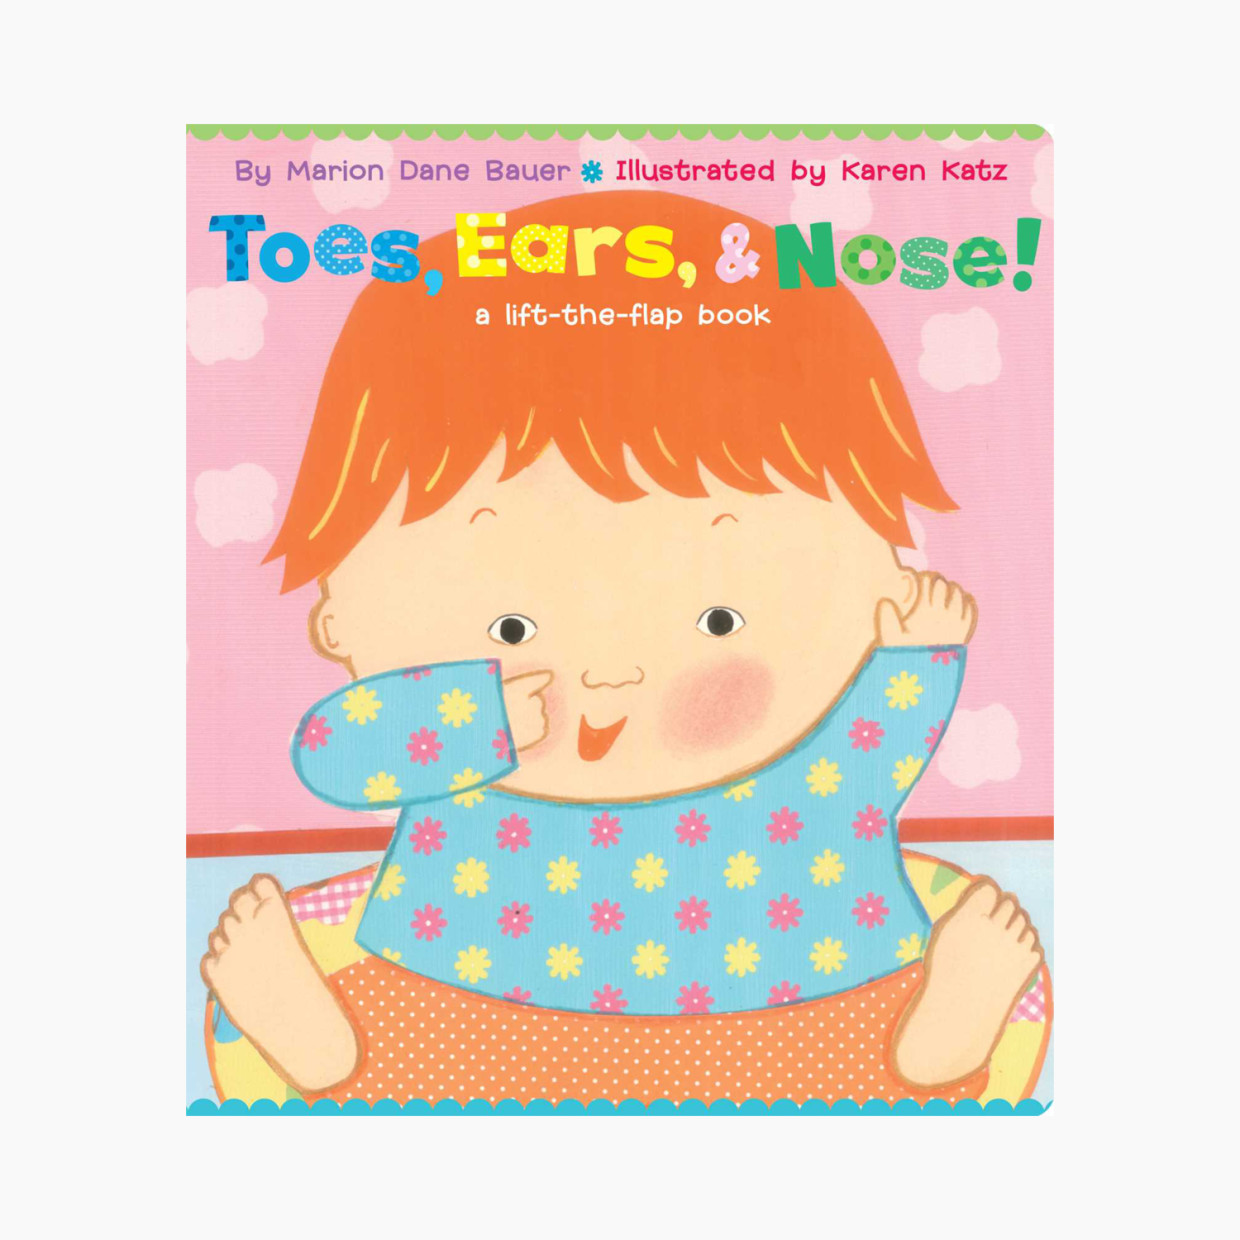 Toes, Ears, & Nose!.